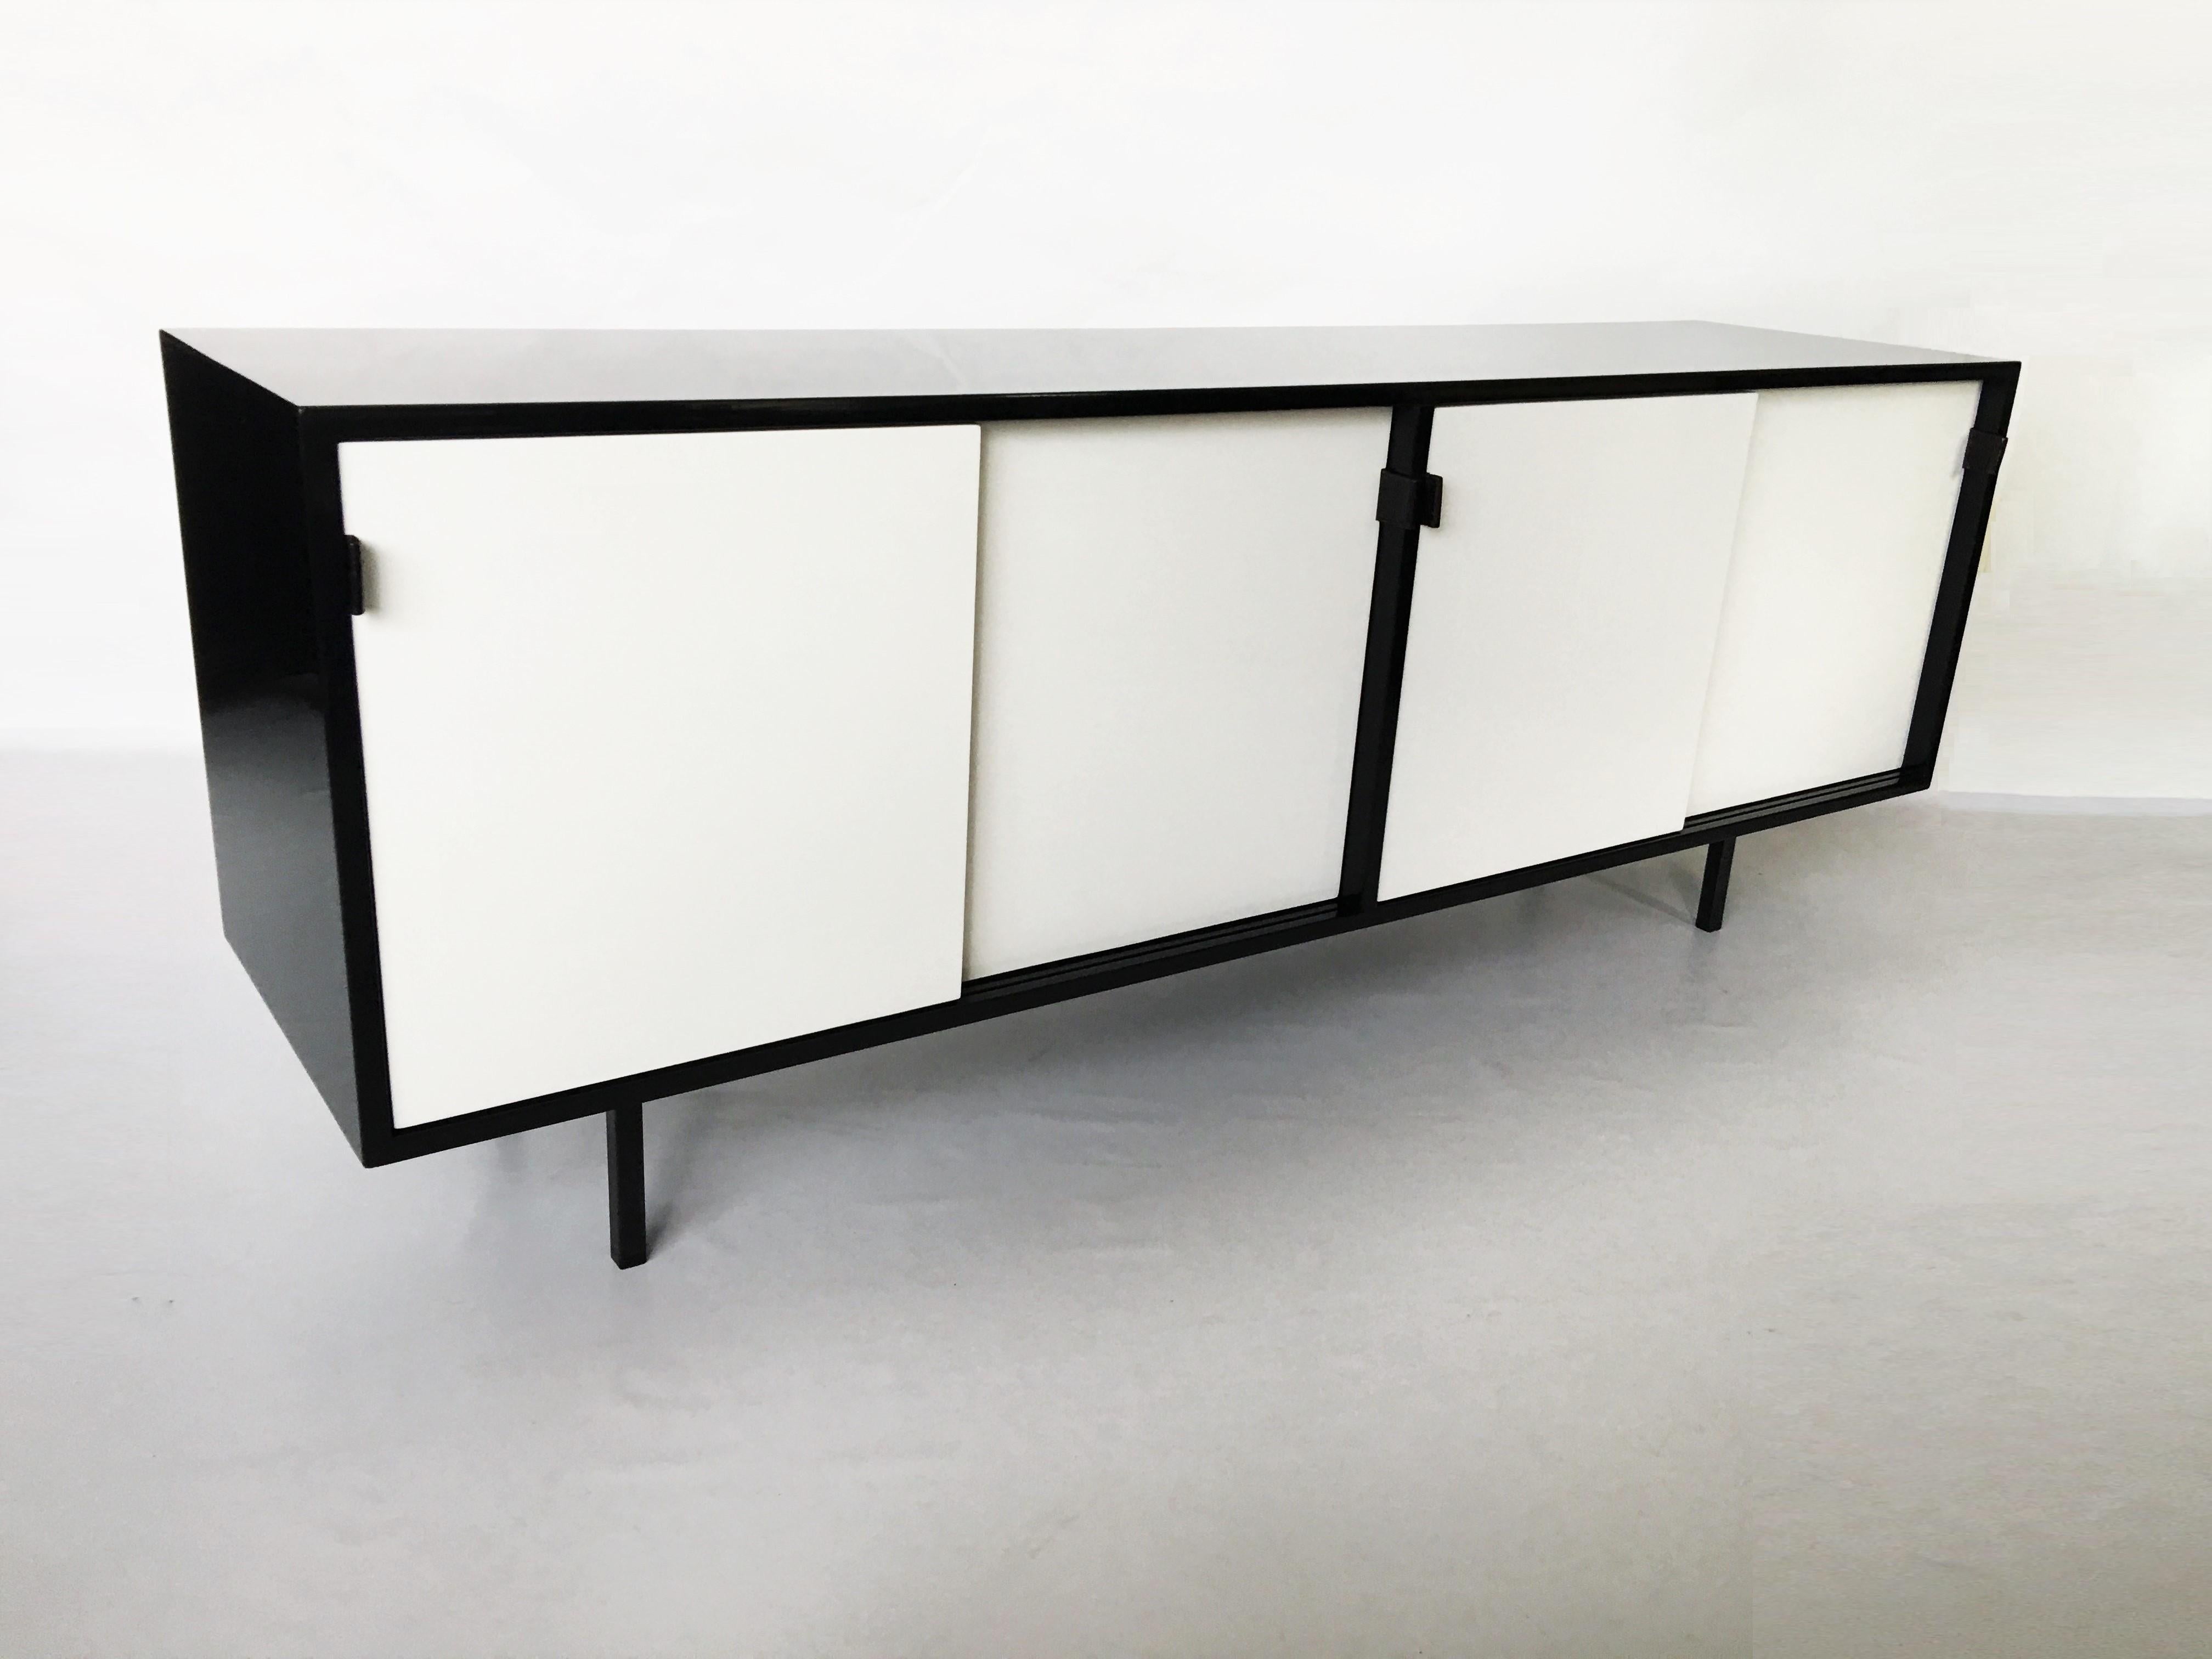 A modern take on the Classic, presented is an eye-catching black and white lacquered sideboard/credenza designed by architect and designer Florence Knoll and manufactured by Knoll associates inc, circa 1950s. The cabinet a features four sliding